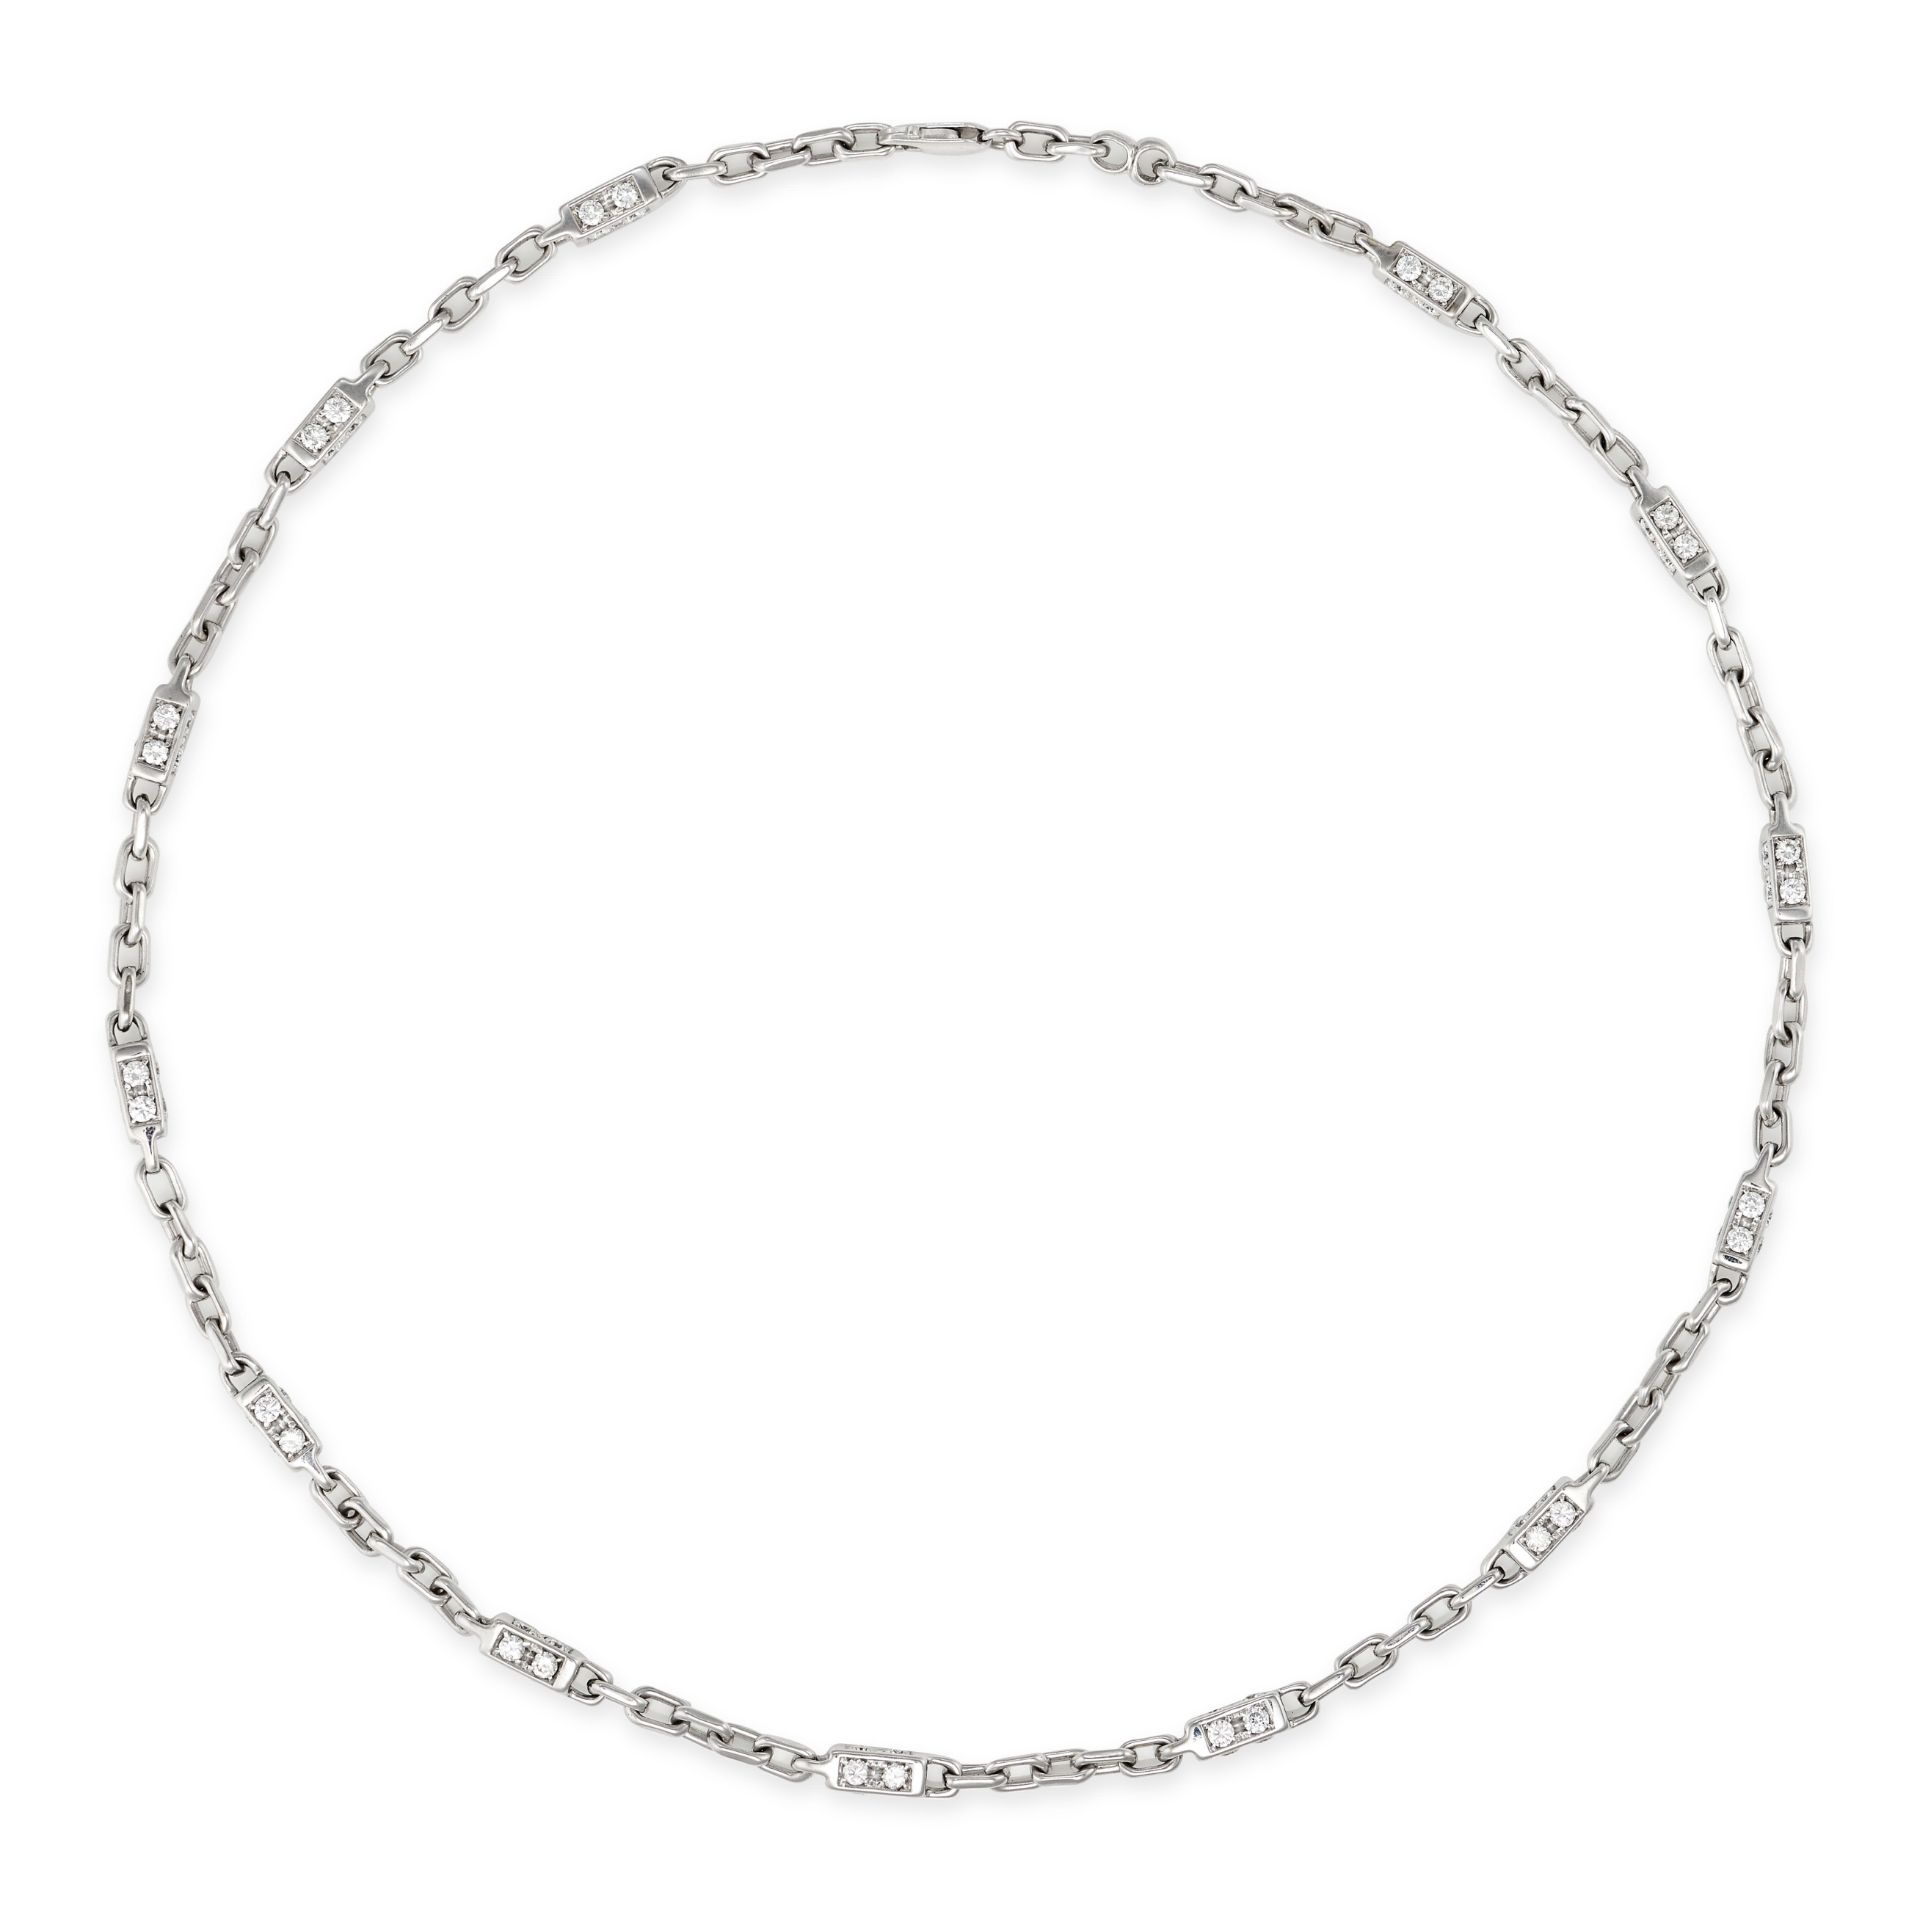 A DIAMOND CHAIN NECKLACE in 18ct white gold, comprising a series of trace and geometric links set...